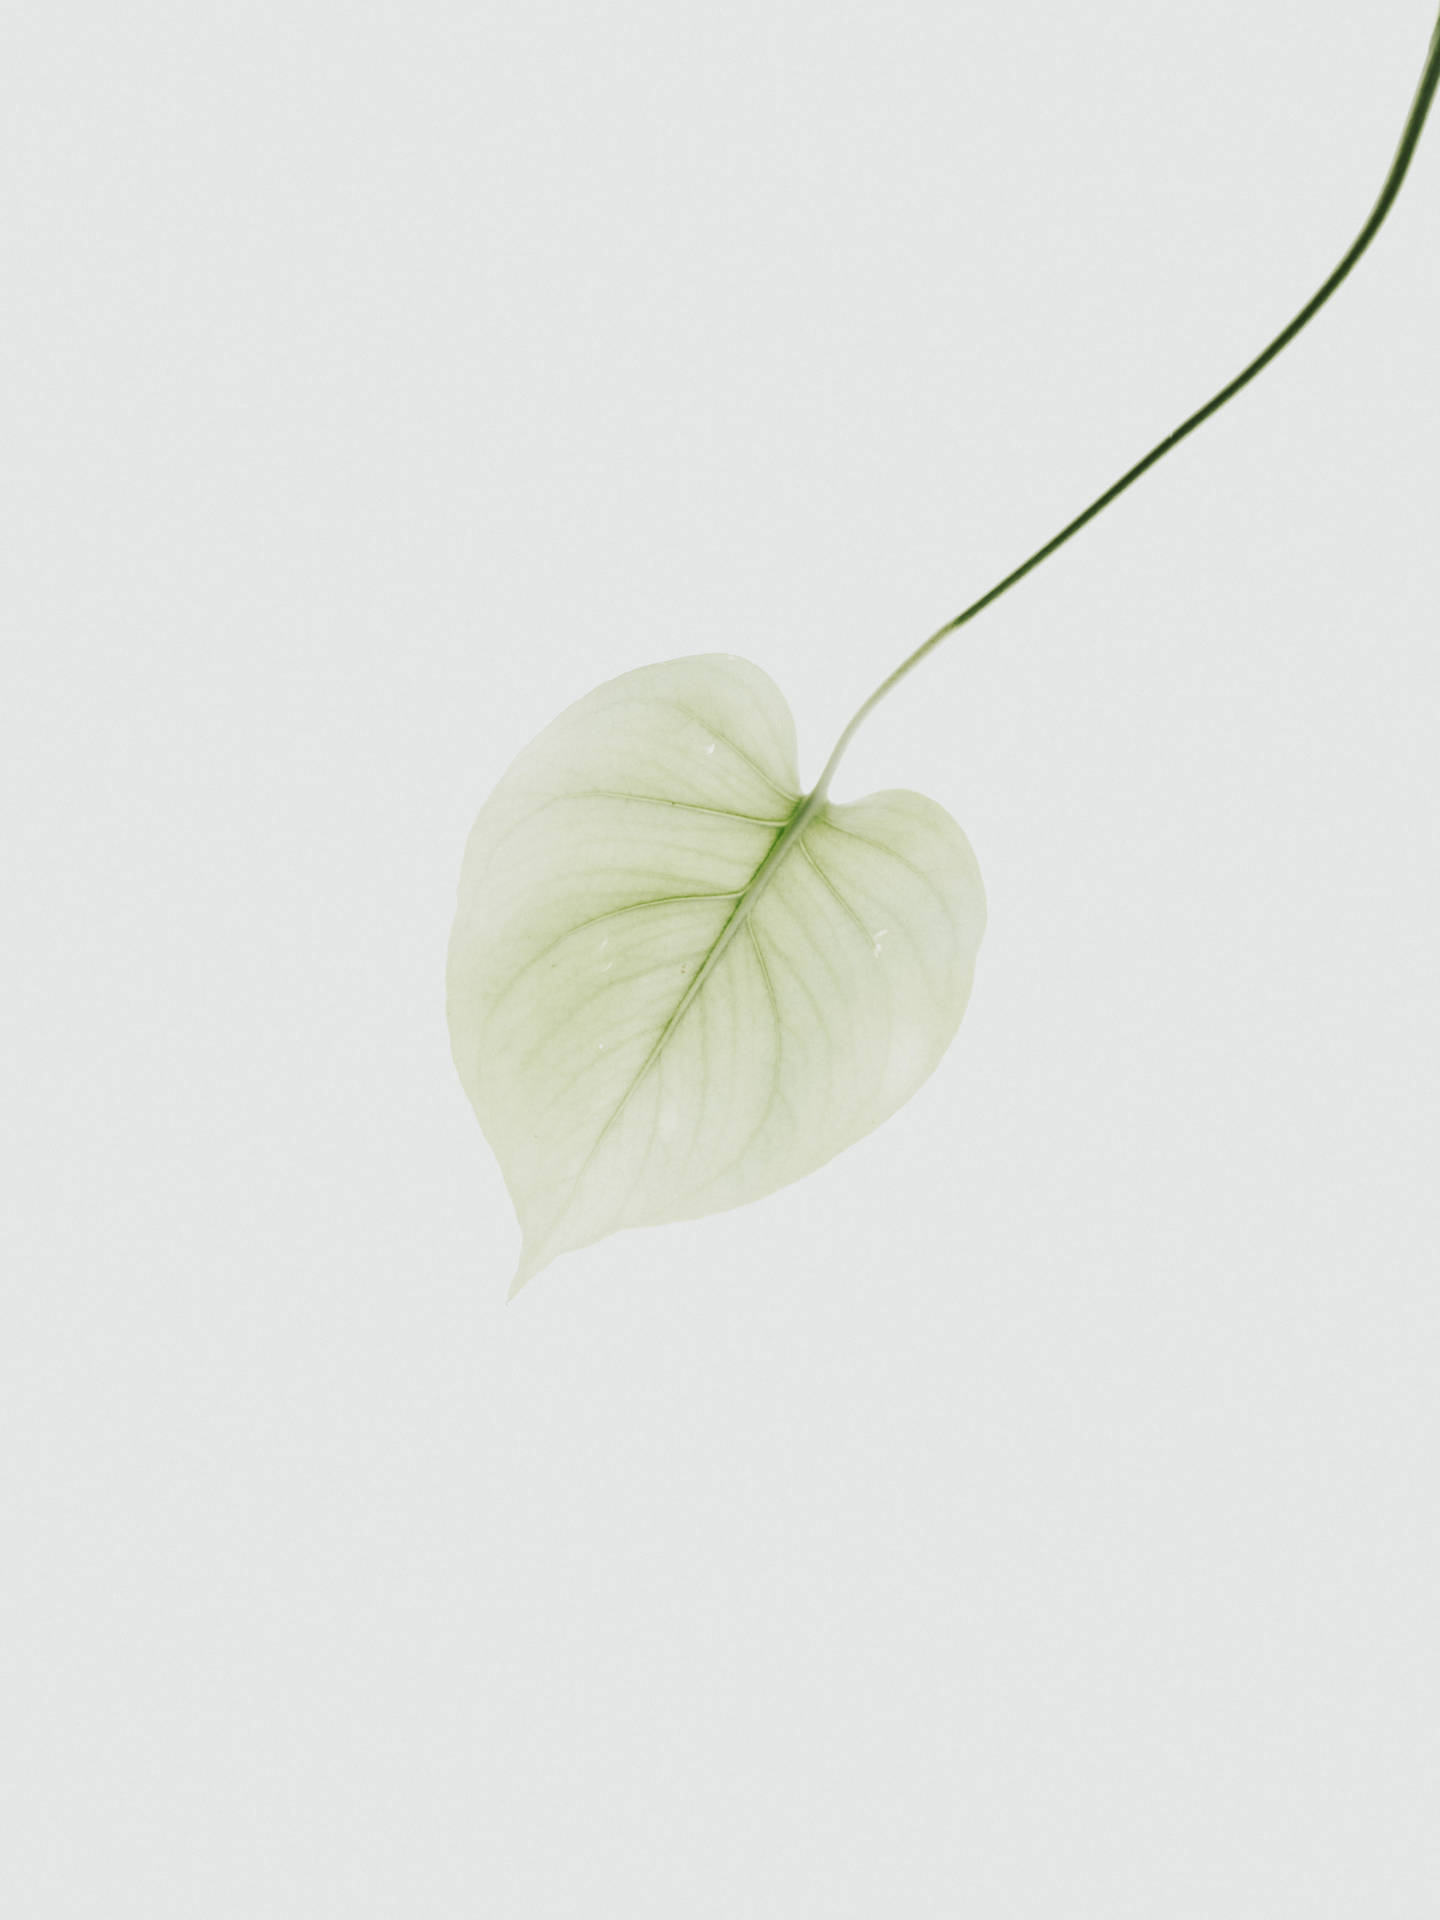 A beautiful transparent leaf showing off its delicate veins. Wallpaper